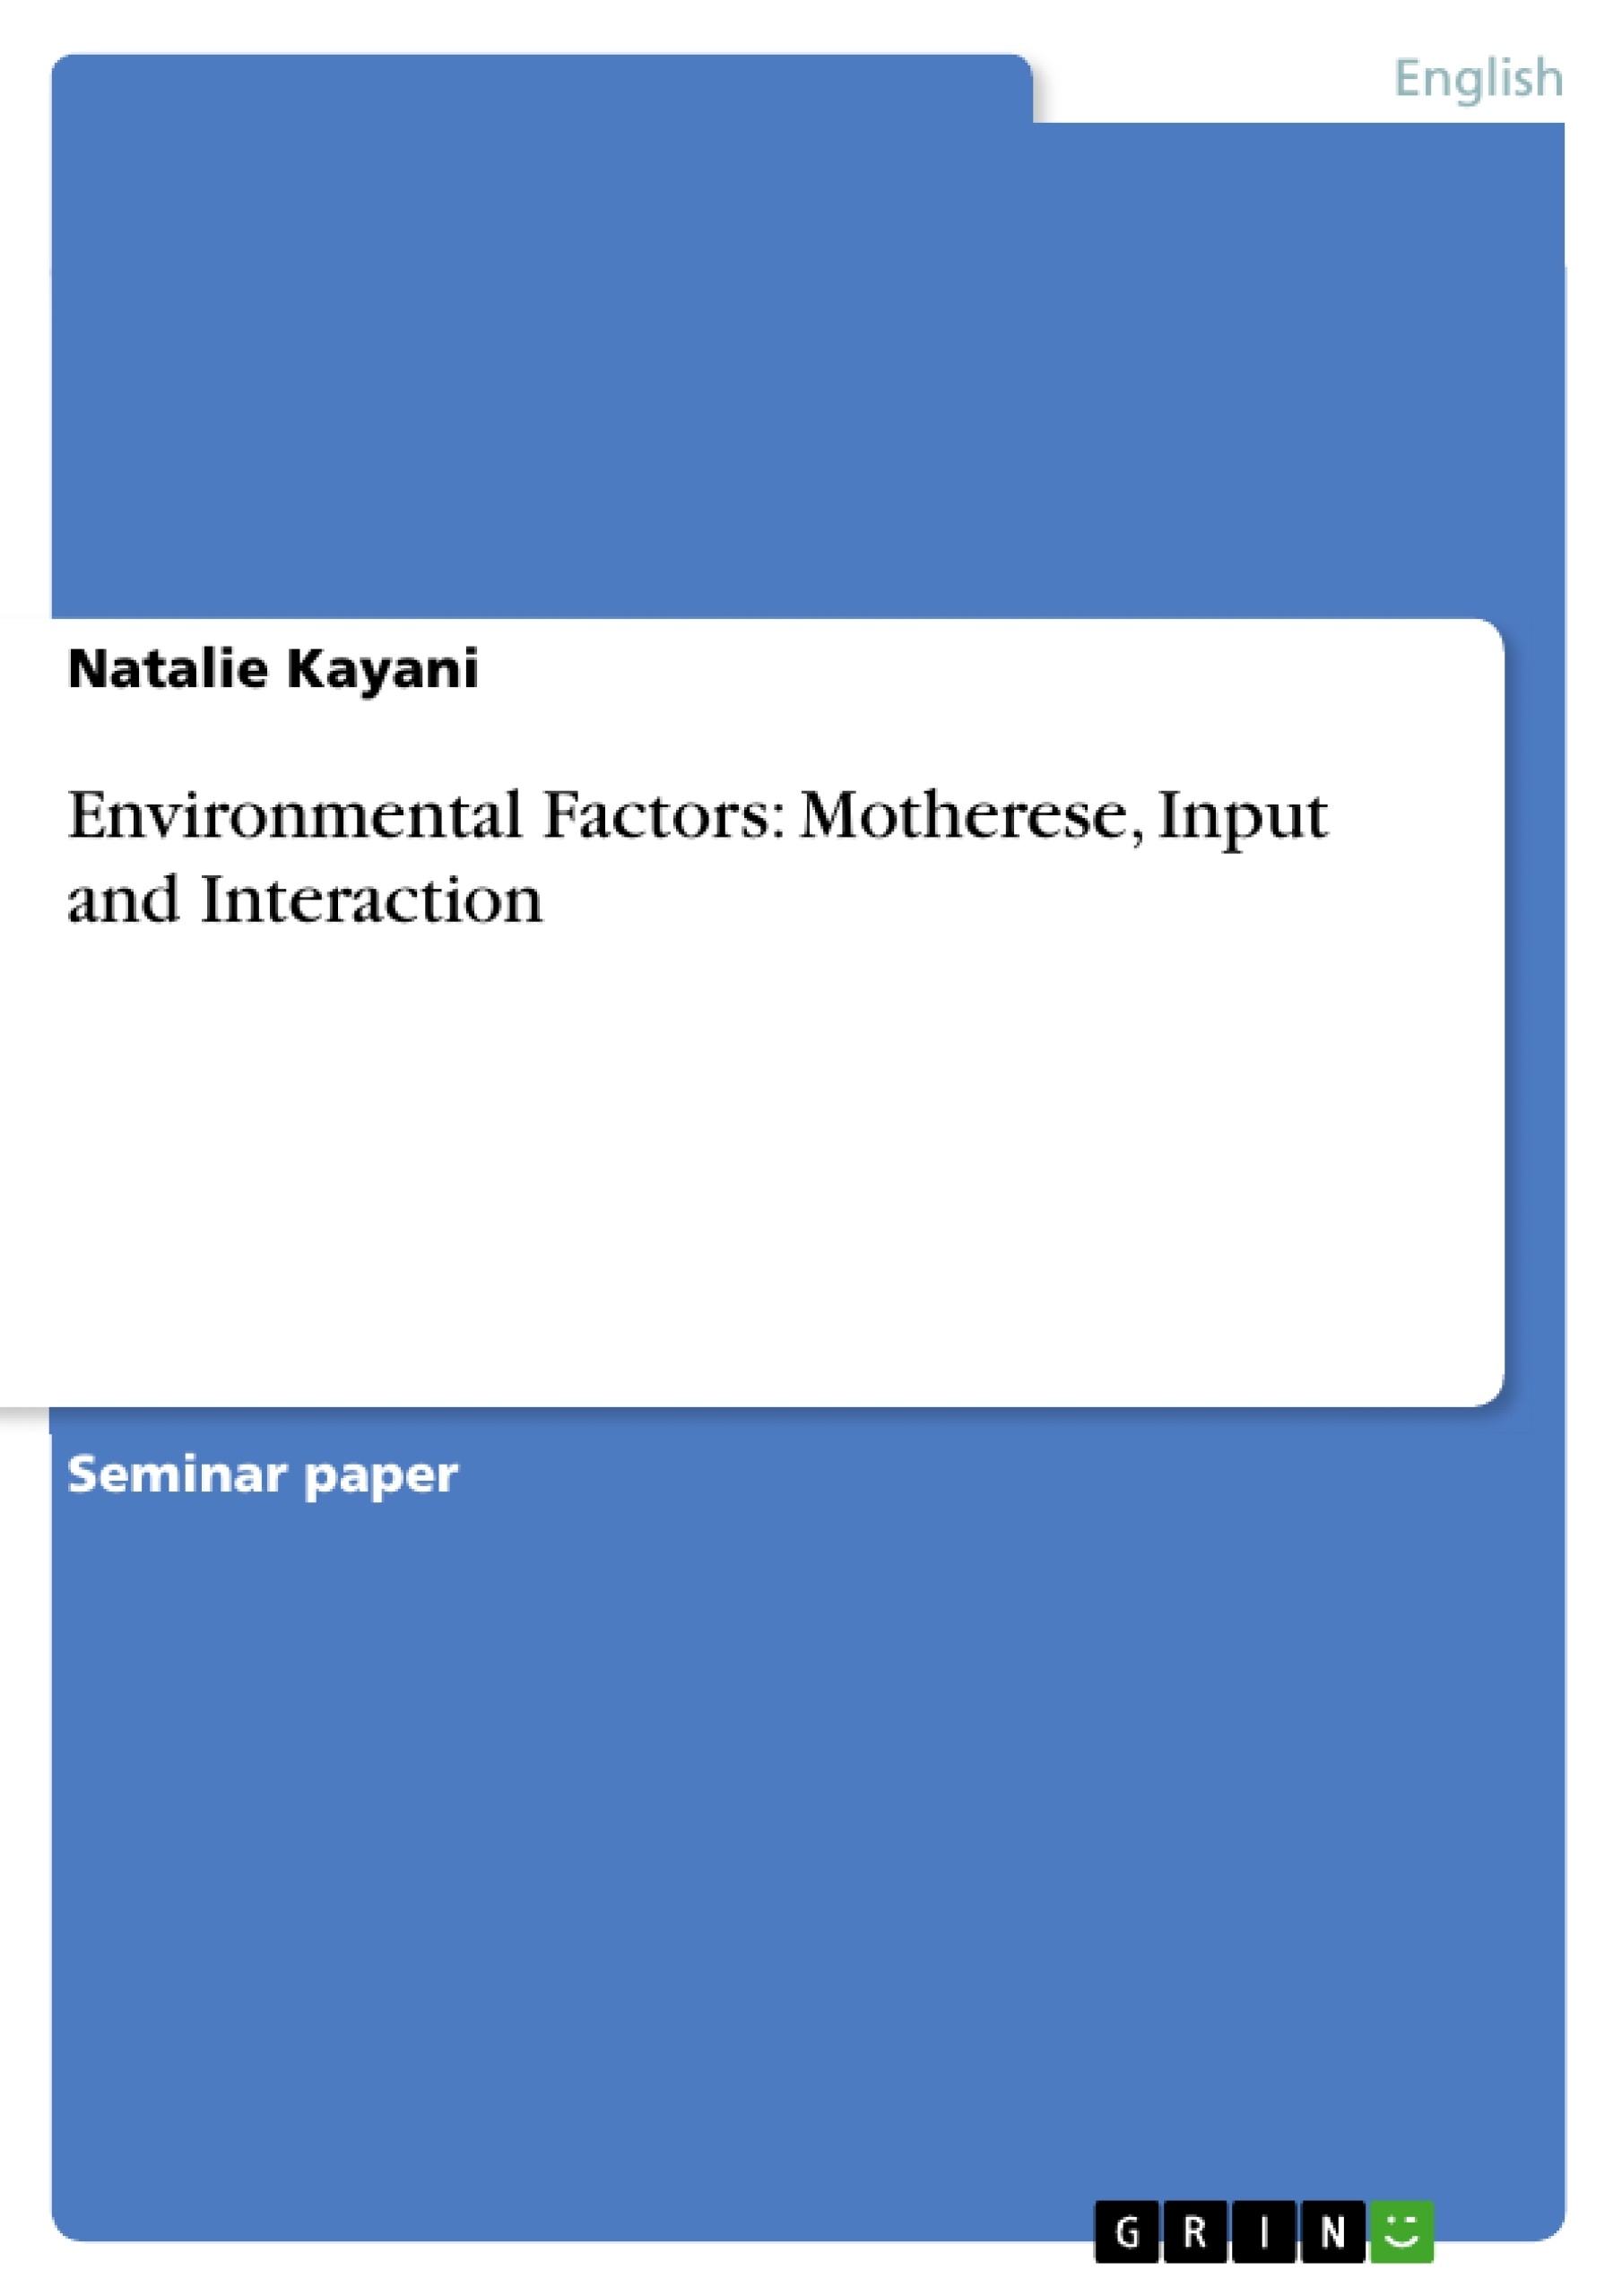 Title: Environmental Factors: Motherese, Input and Interaction